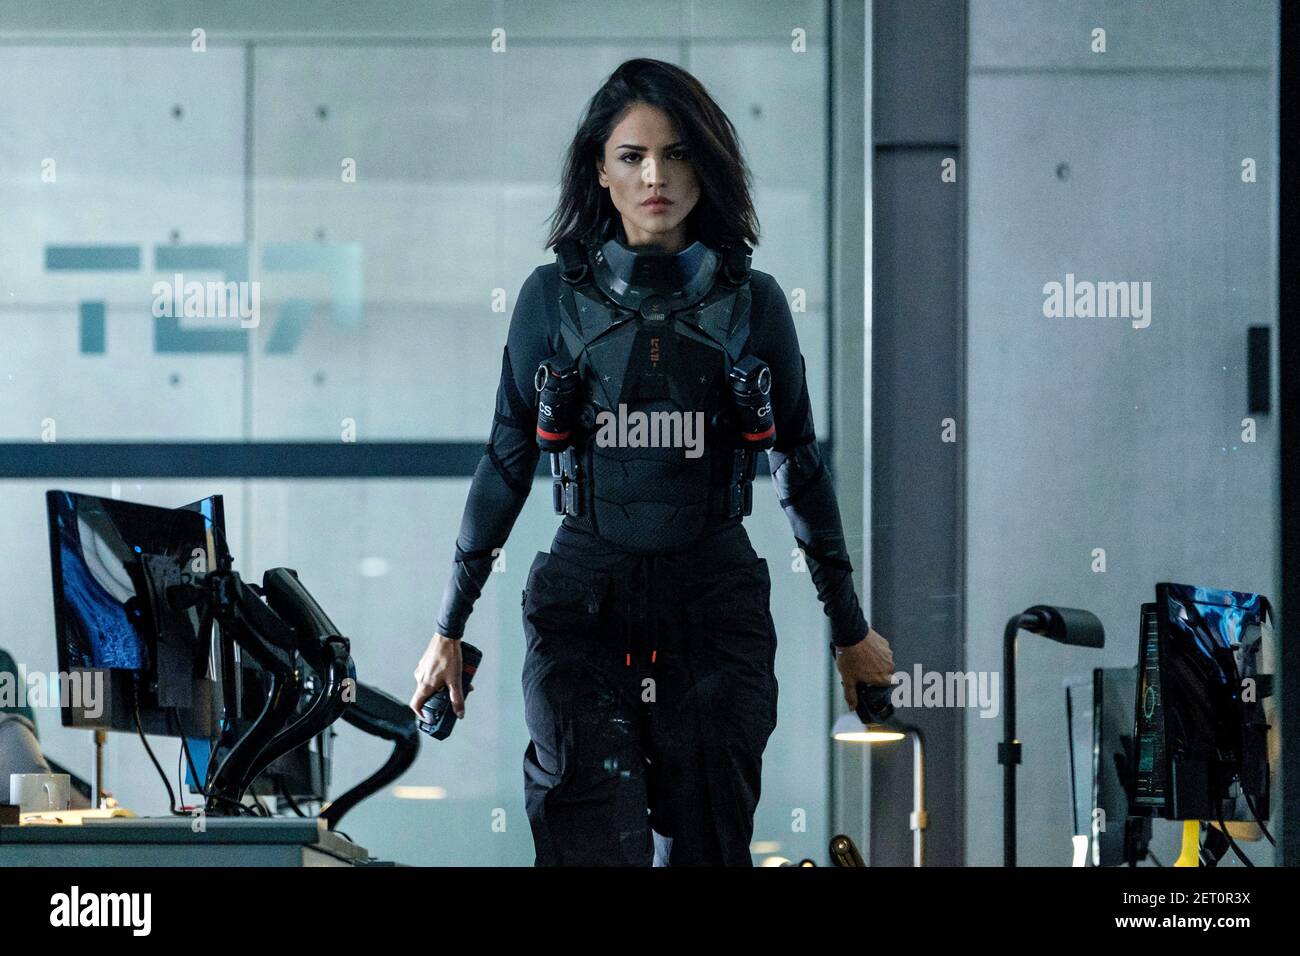 EIZA GONZALEZ in BLOODSHOT (2020), directed by DAVE WILSON. Credit: COLUMBIA PICTURES / Album Stock Photo